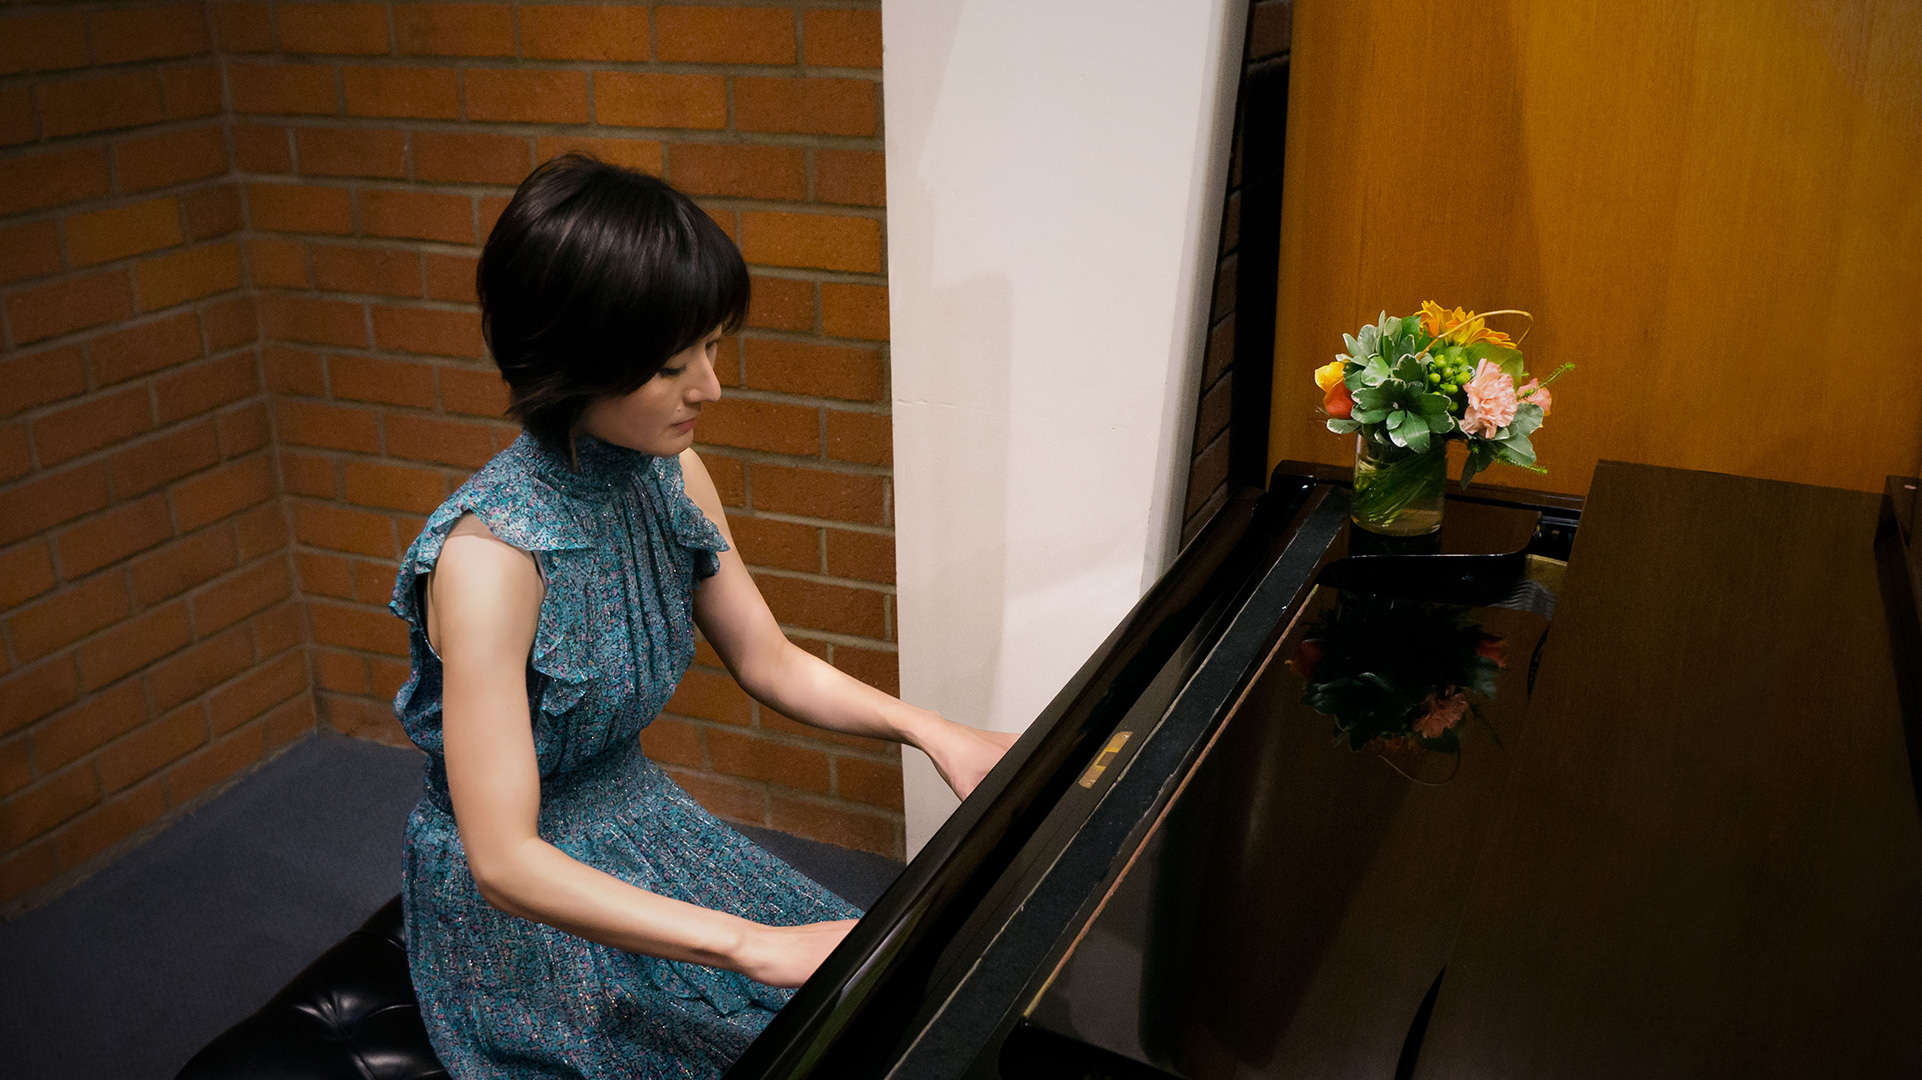 A picture a Fumiko playing the piano